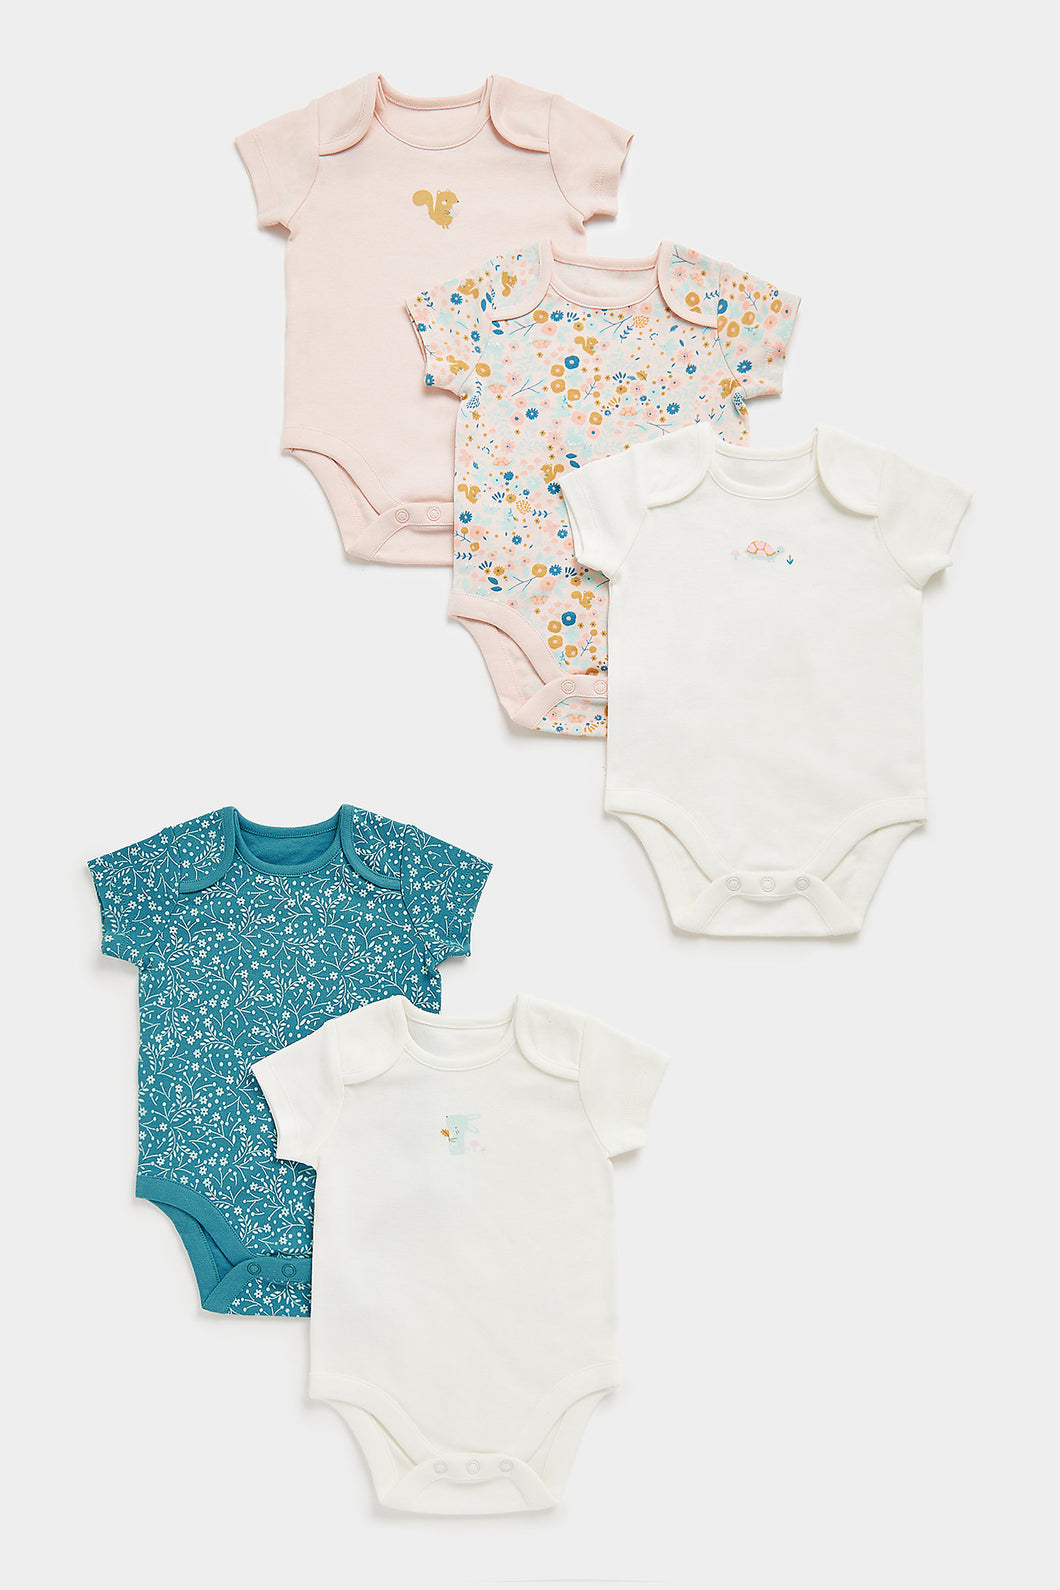 Mothercare Floral Forest Short-Sleeved Baby Bodysuits - 5 Pack